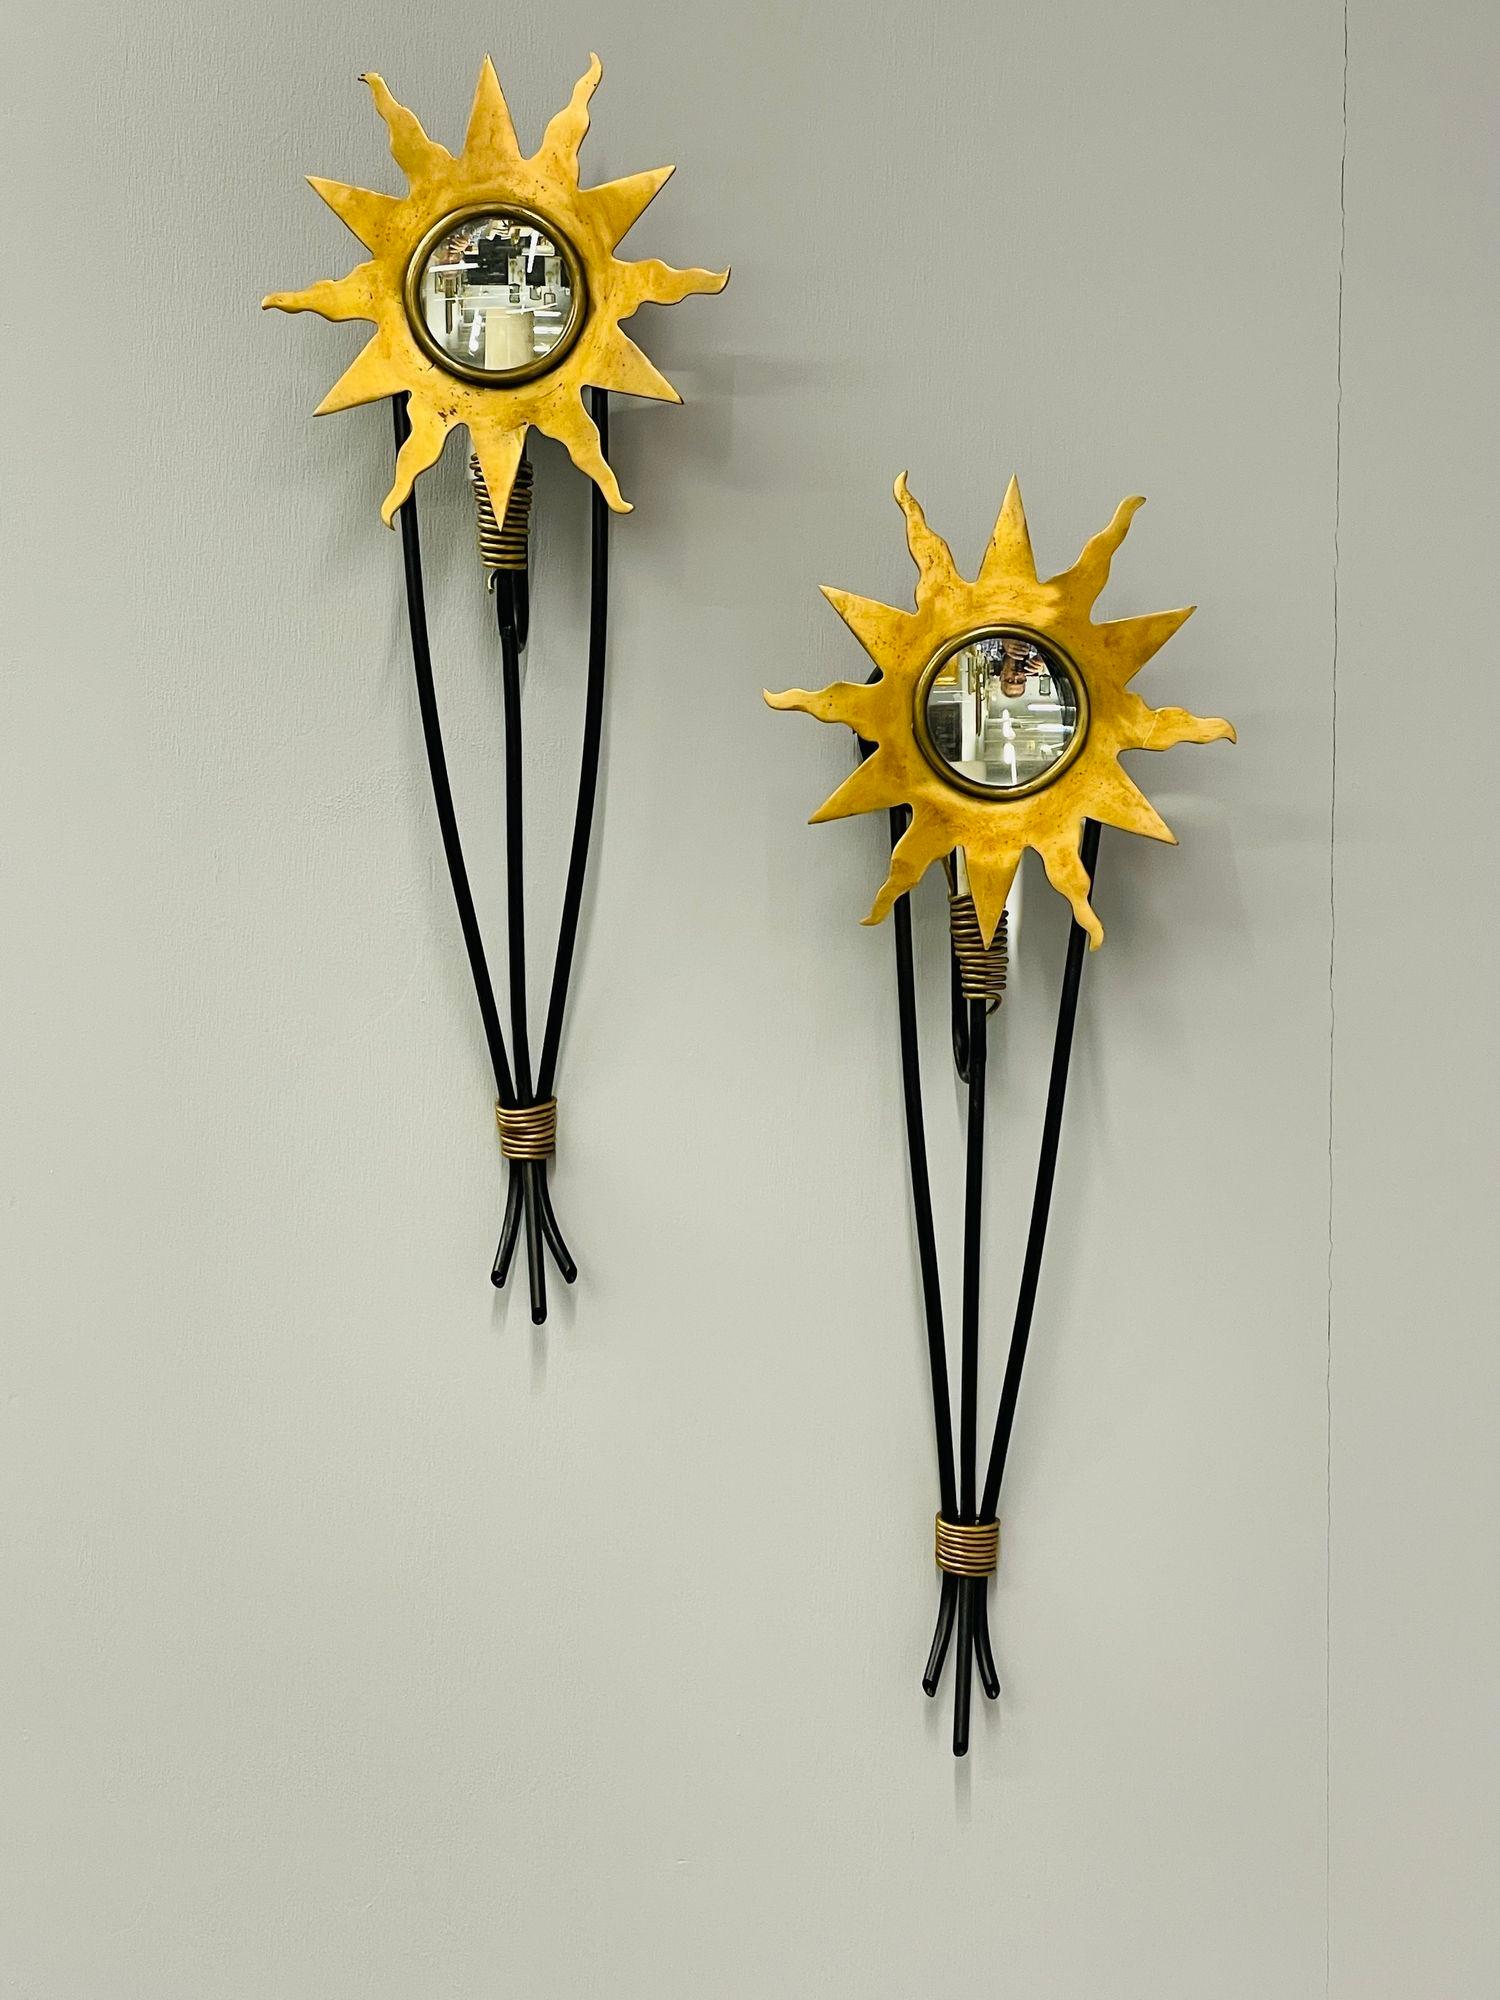 Pair of French Modern Wall Sconces, Bronze Sunburst Bagues Style, Bronze / Steel
 
Style and Grace abound with this stunning pair of handmade bronze sunburst magnified mirrored back wall sconce. The large bronze sunburst design supported by a